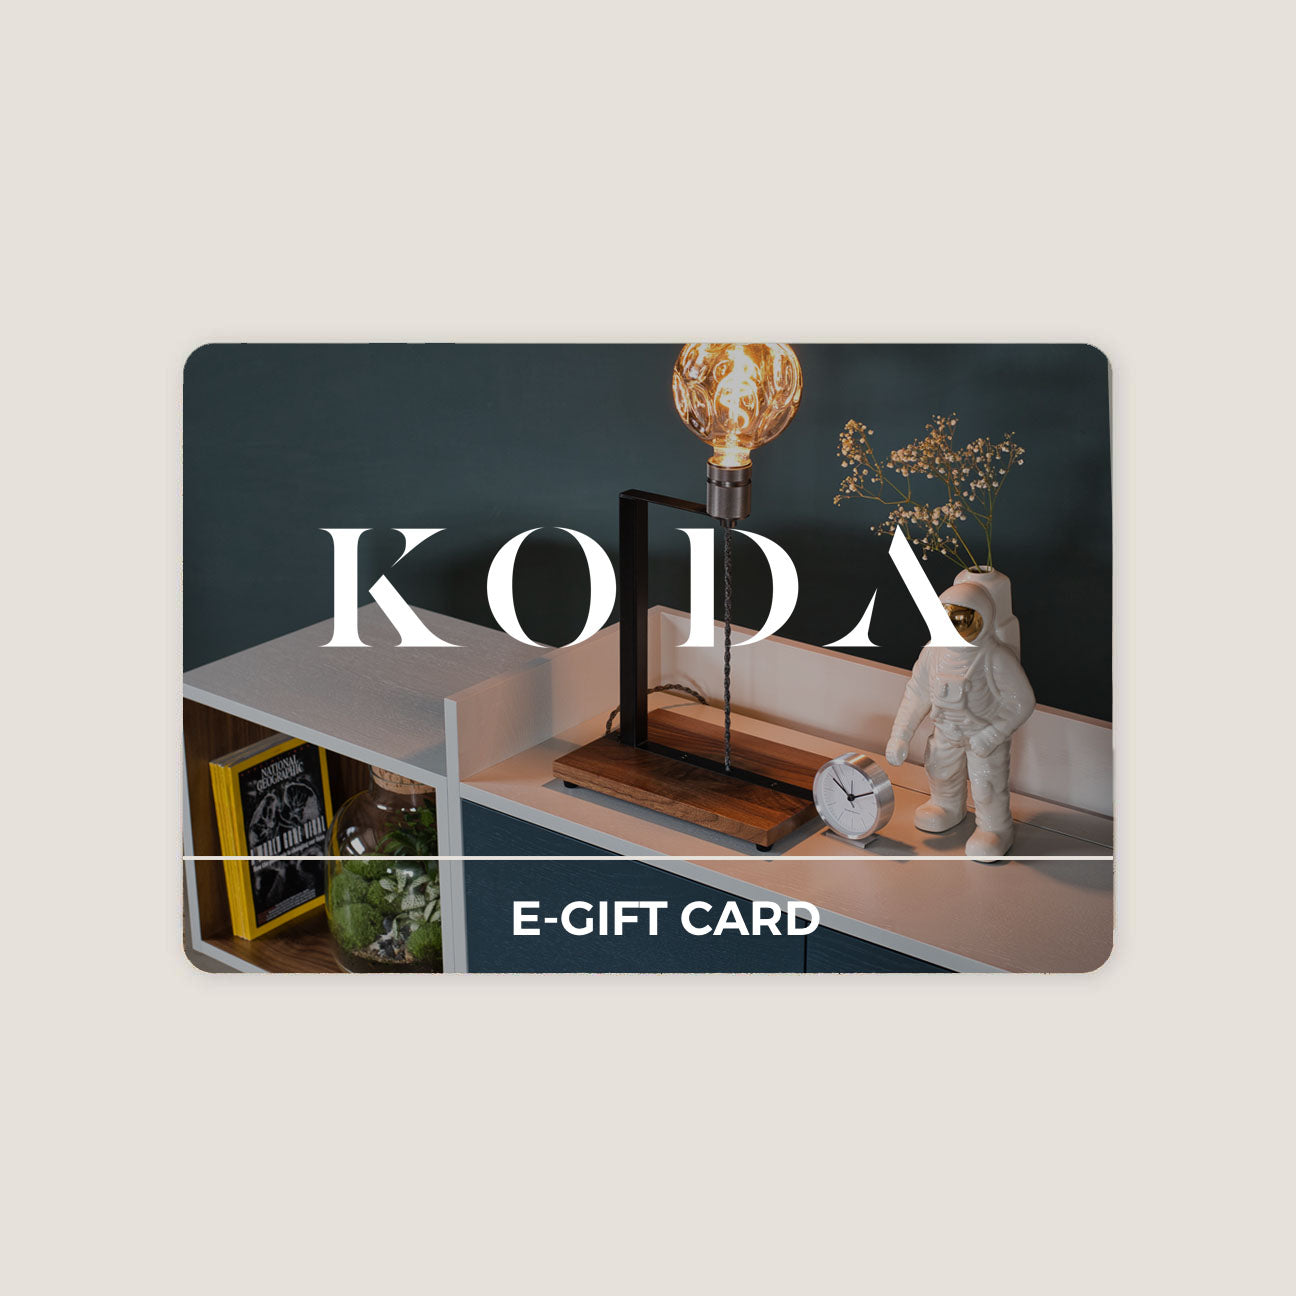 An image of the Electronic GIFT VOUCHER product available from Koda Studios